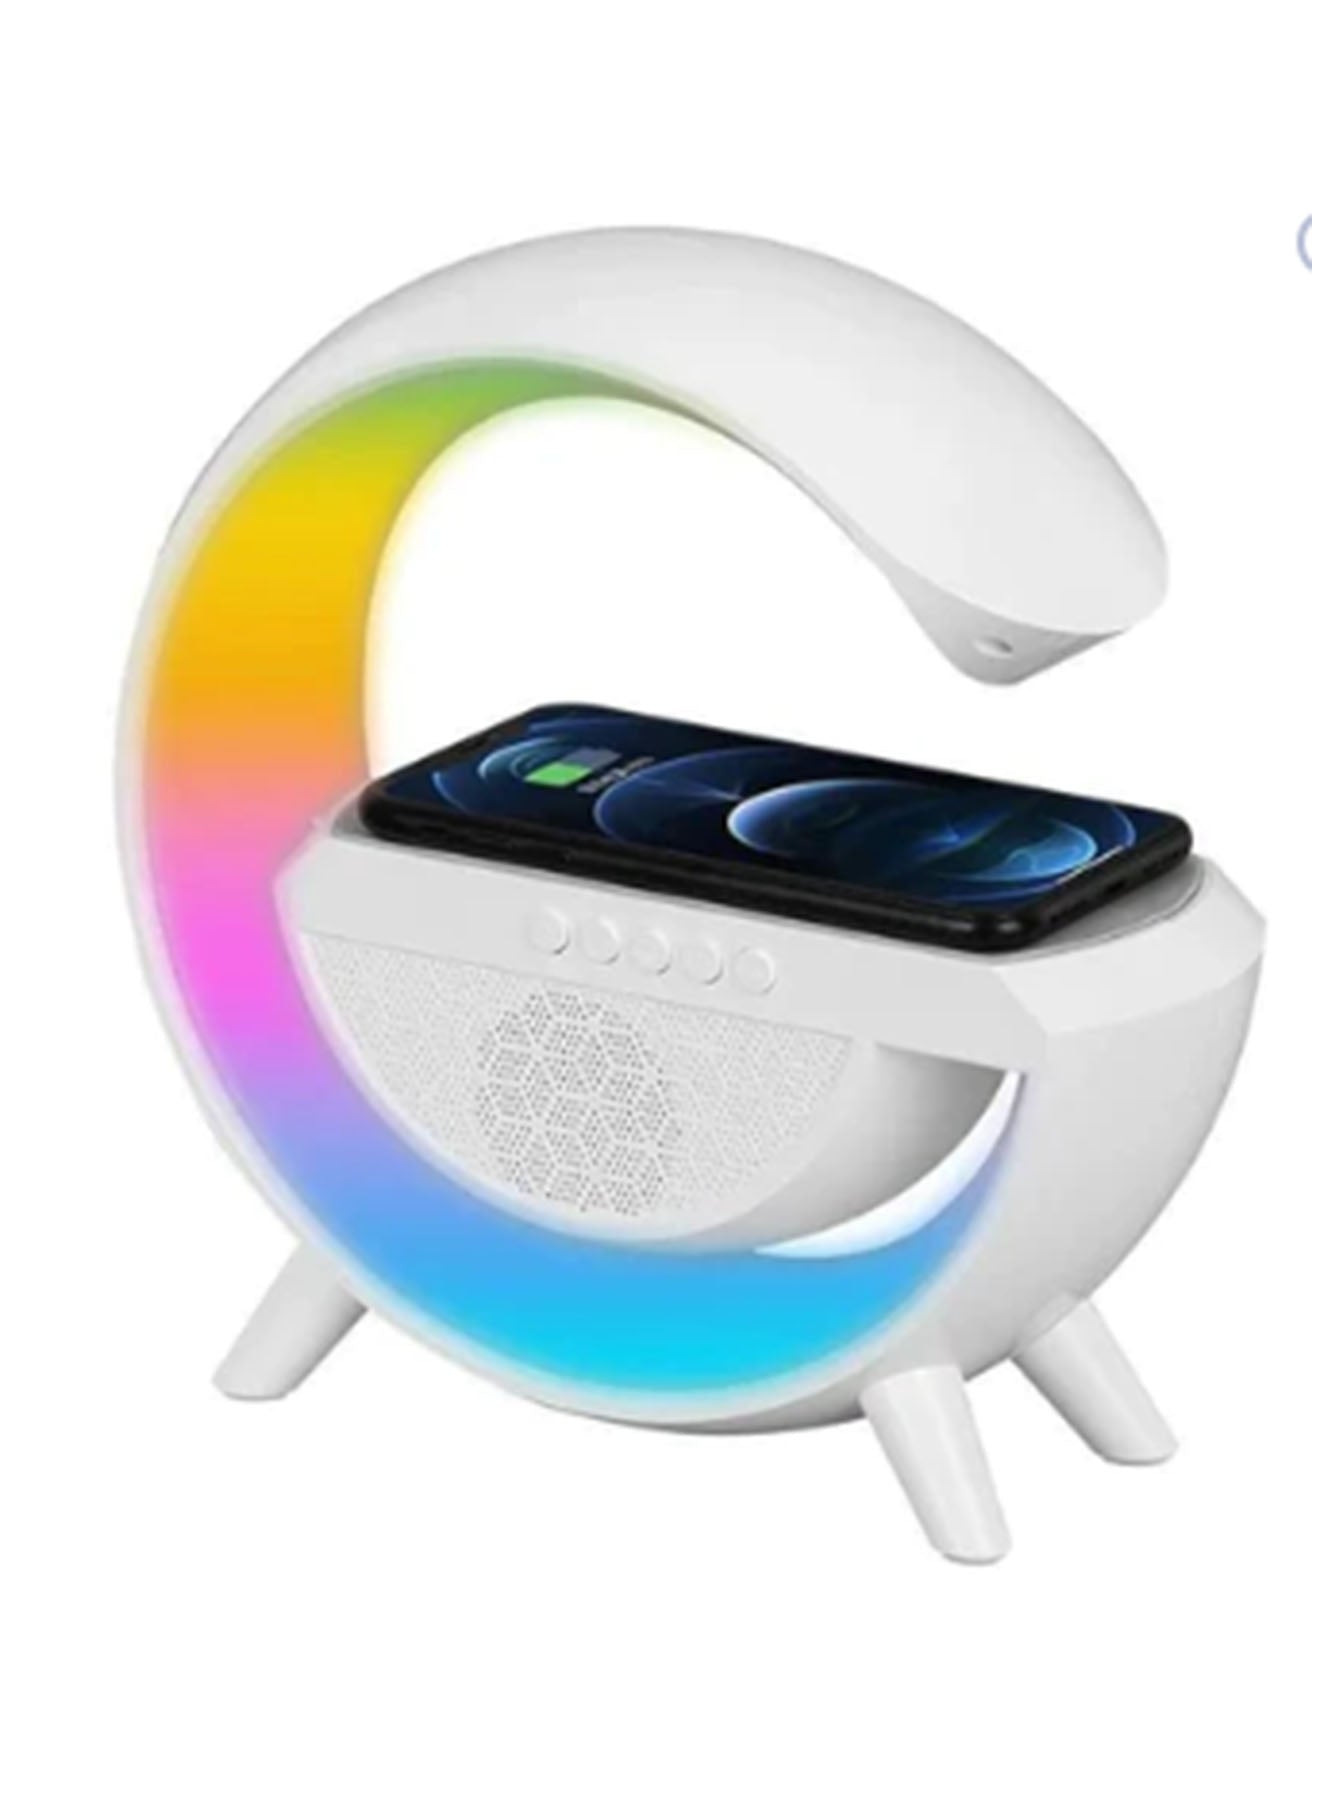 DANIM Led Wireless Charger Speaker Portable Speaker Bluetooth Wireless Charging Wireless Charing Bluetooth Speakers Compatible with all Bluetooth Devices